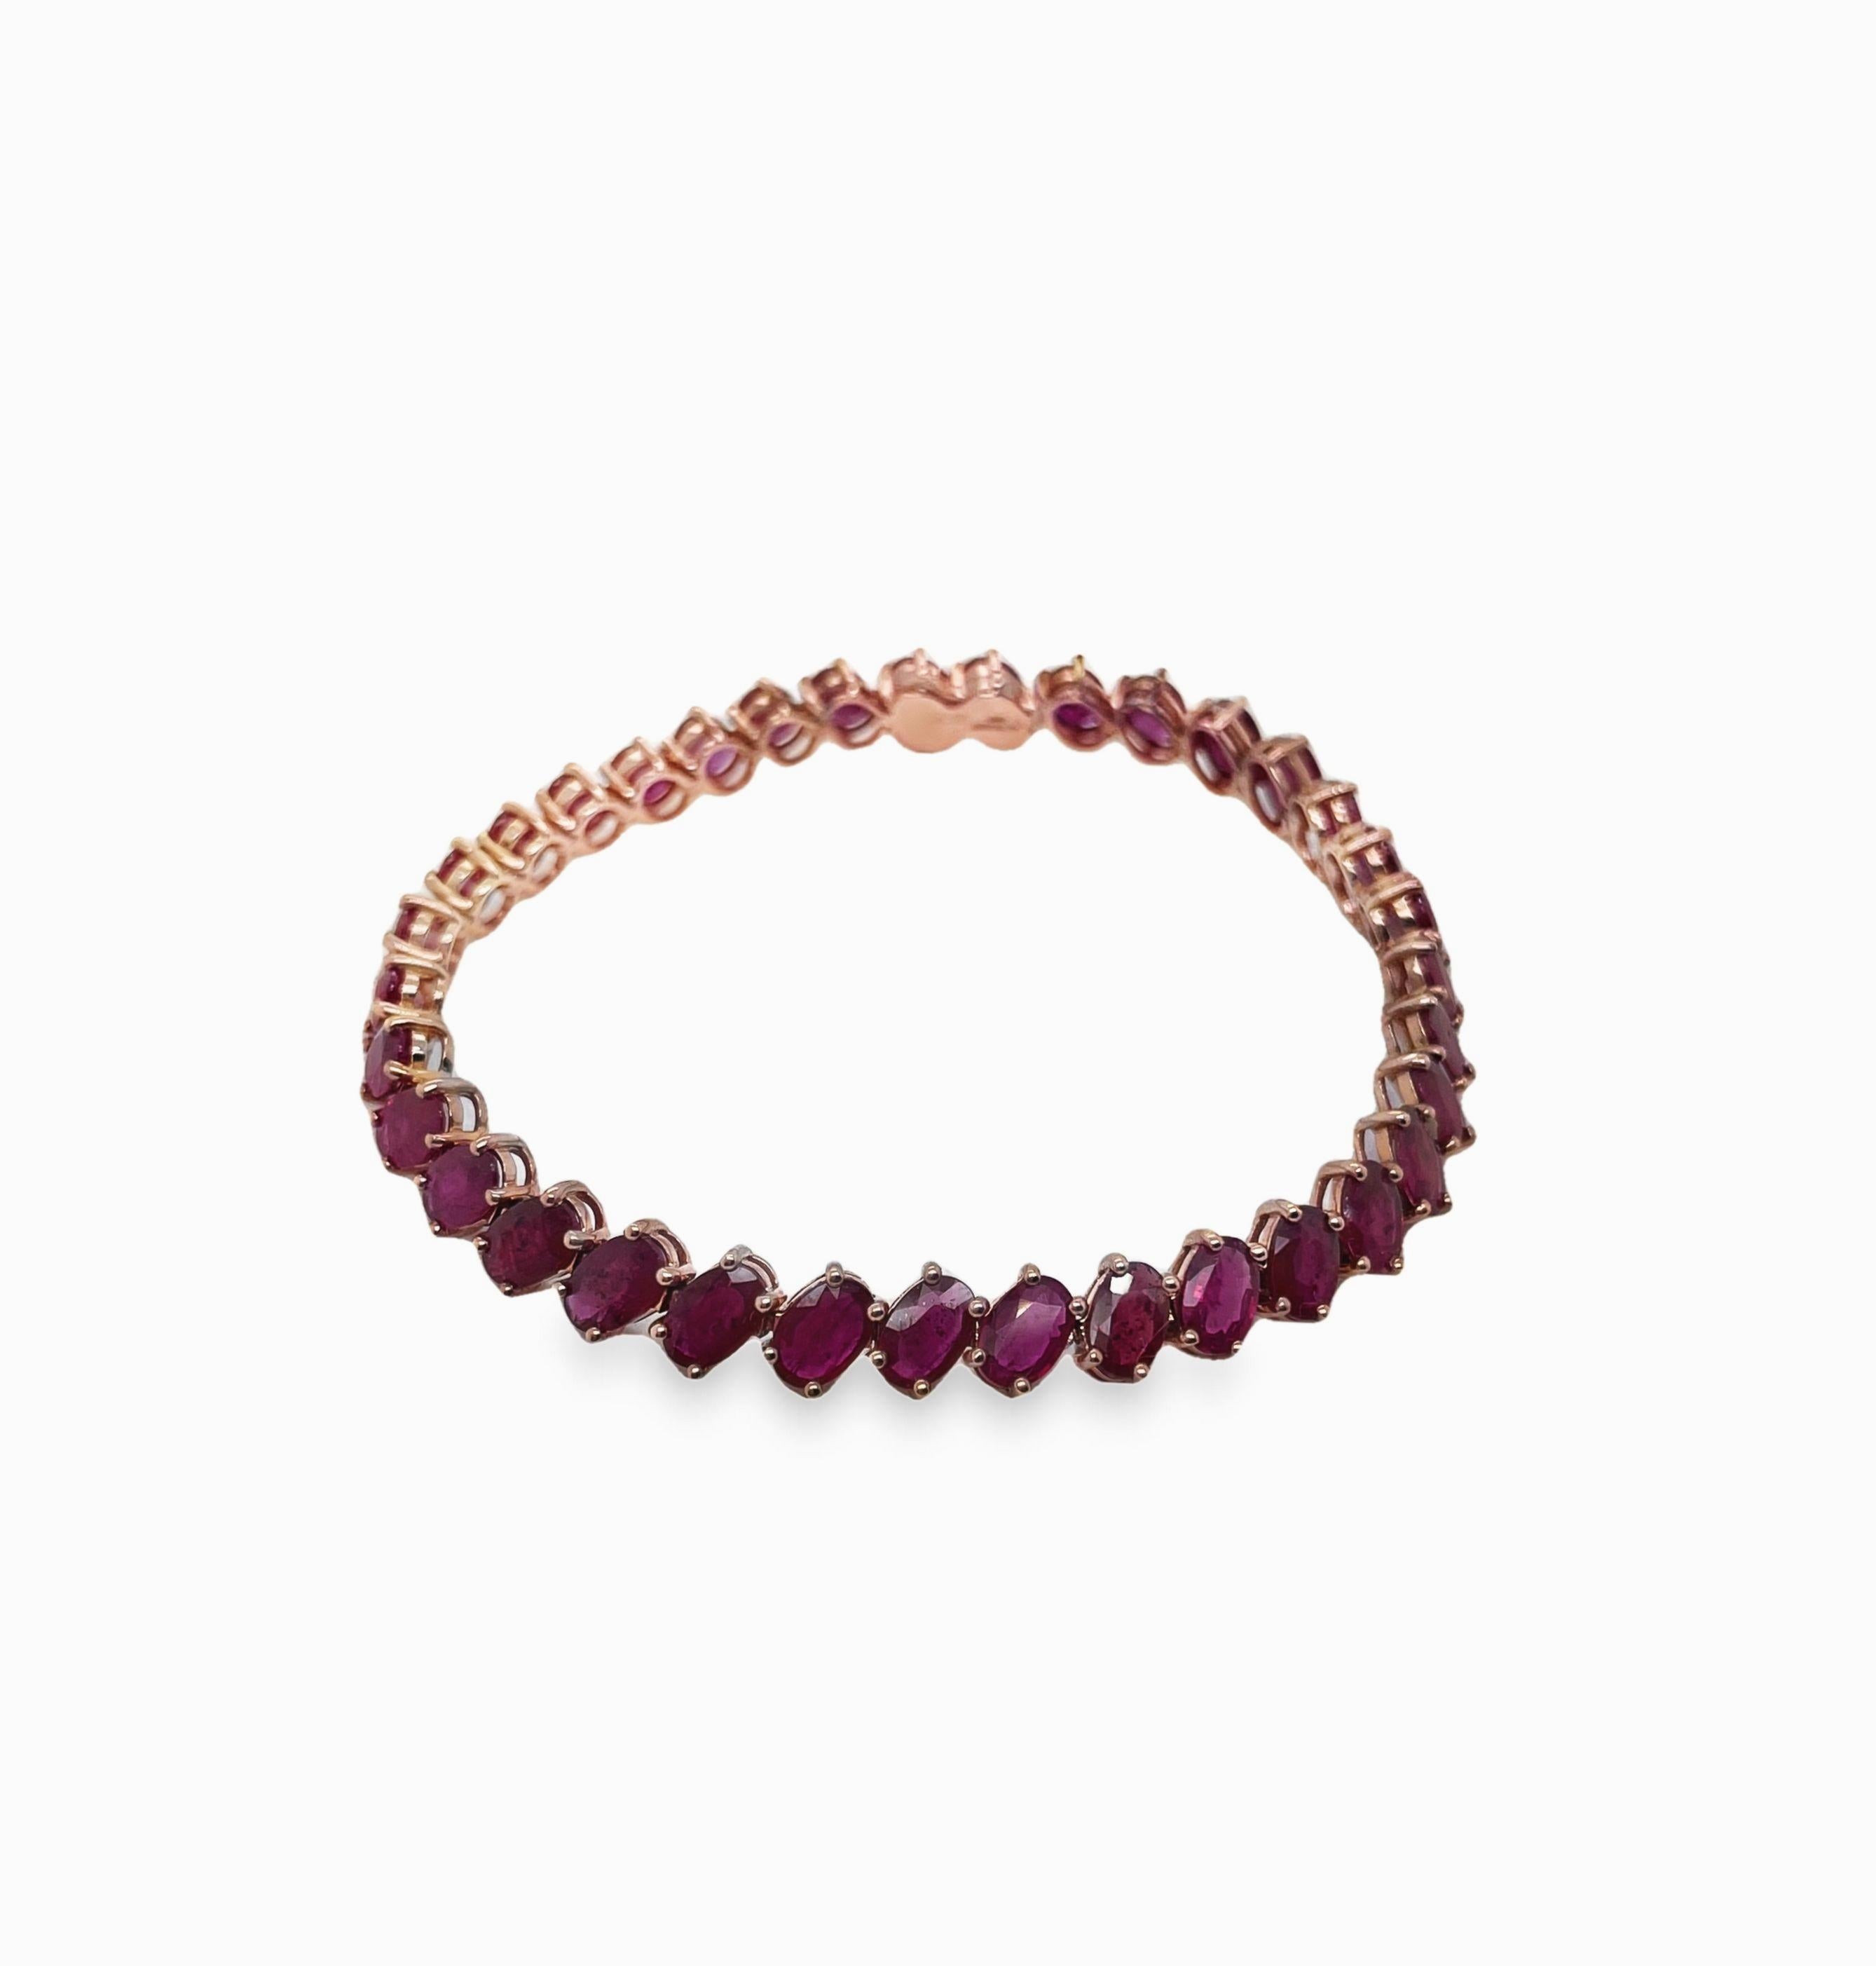 Adorn your wrist with a touch of exquisite allure – a rose gold bracelet featuring 16.74 carats of natural oval-cut rubies. Set in 14K pink gold, this captivating piece effortlessly combines the timeless beauty of rubies with a chic and contemporary